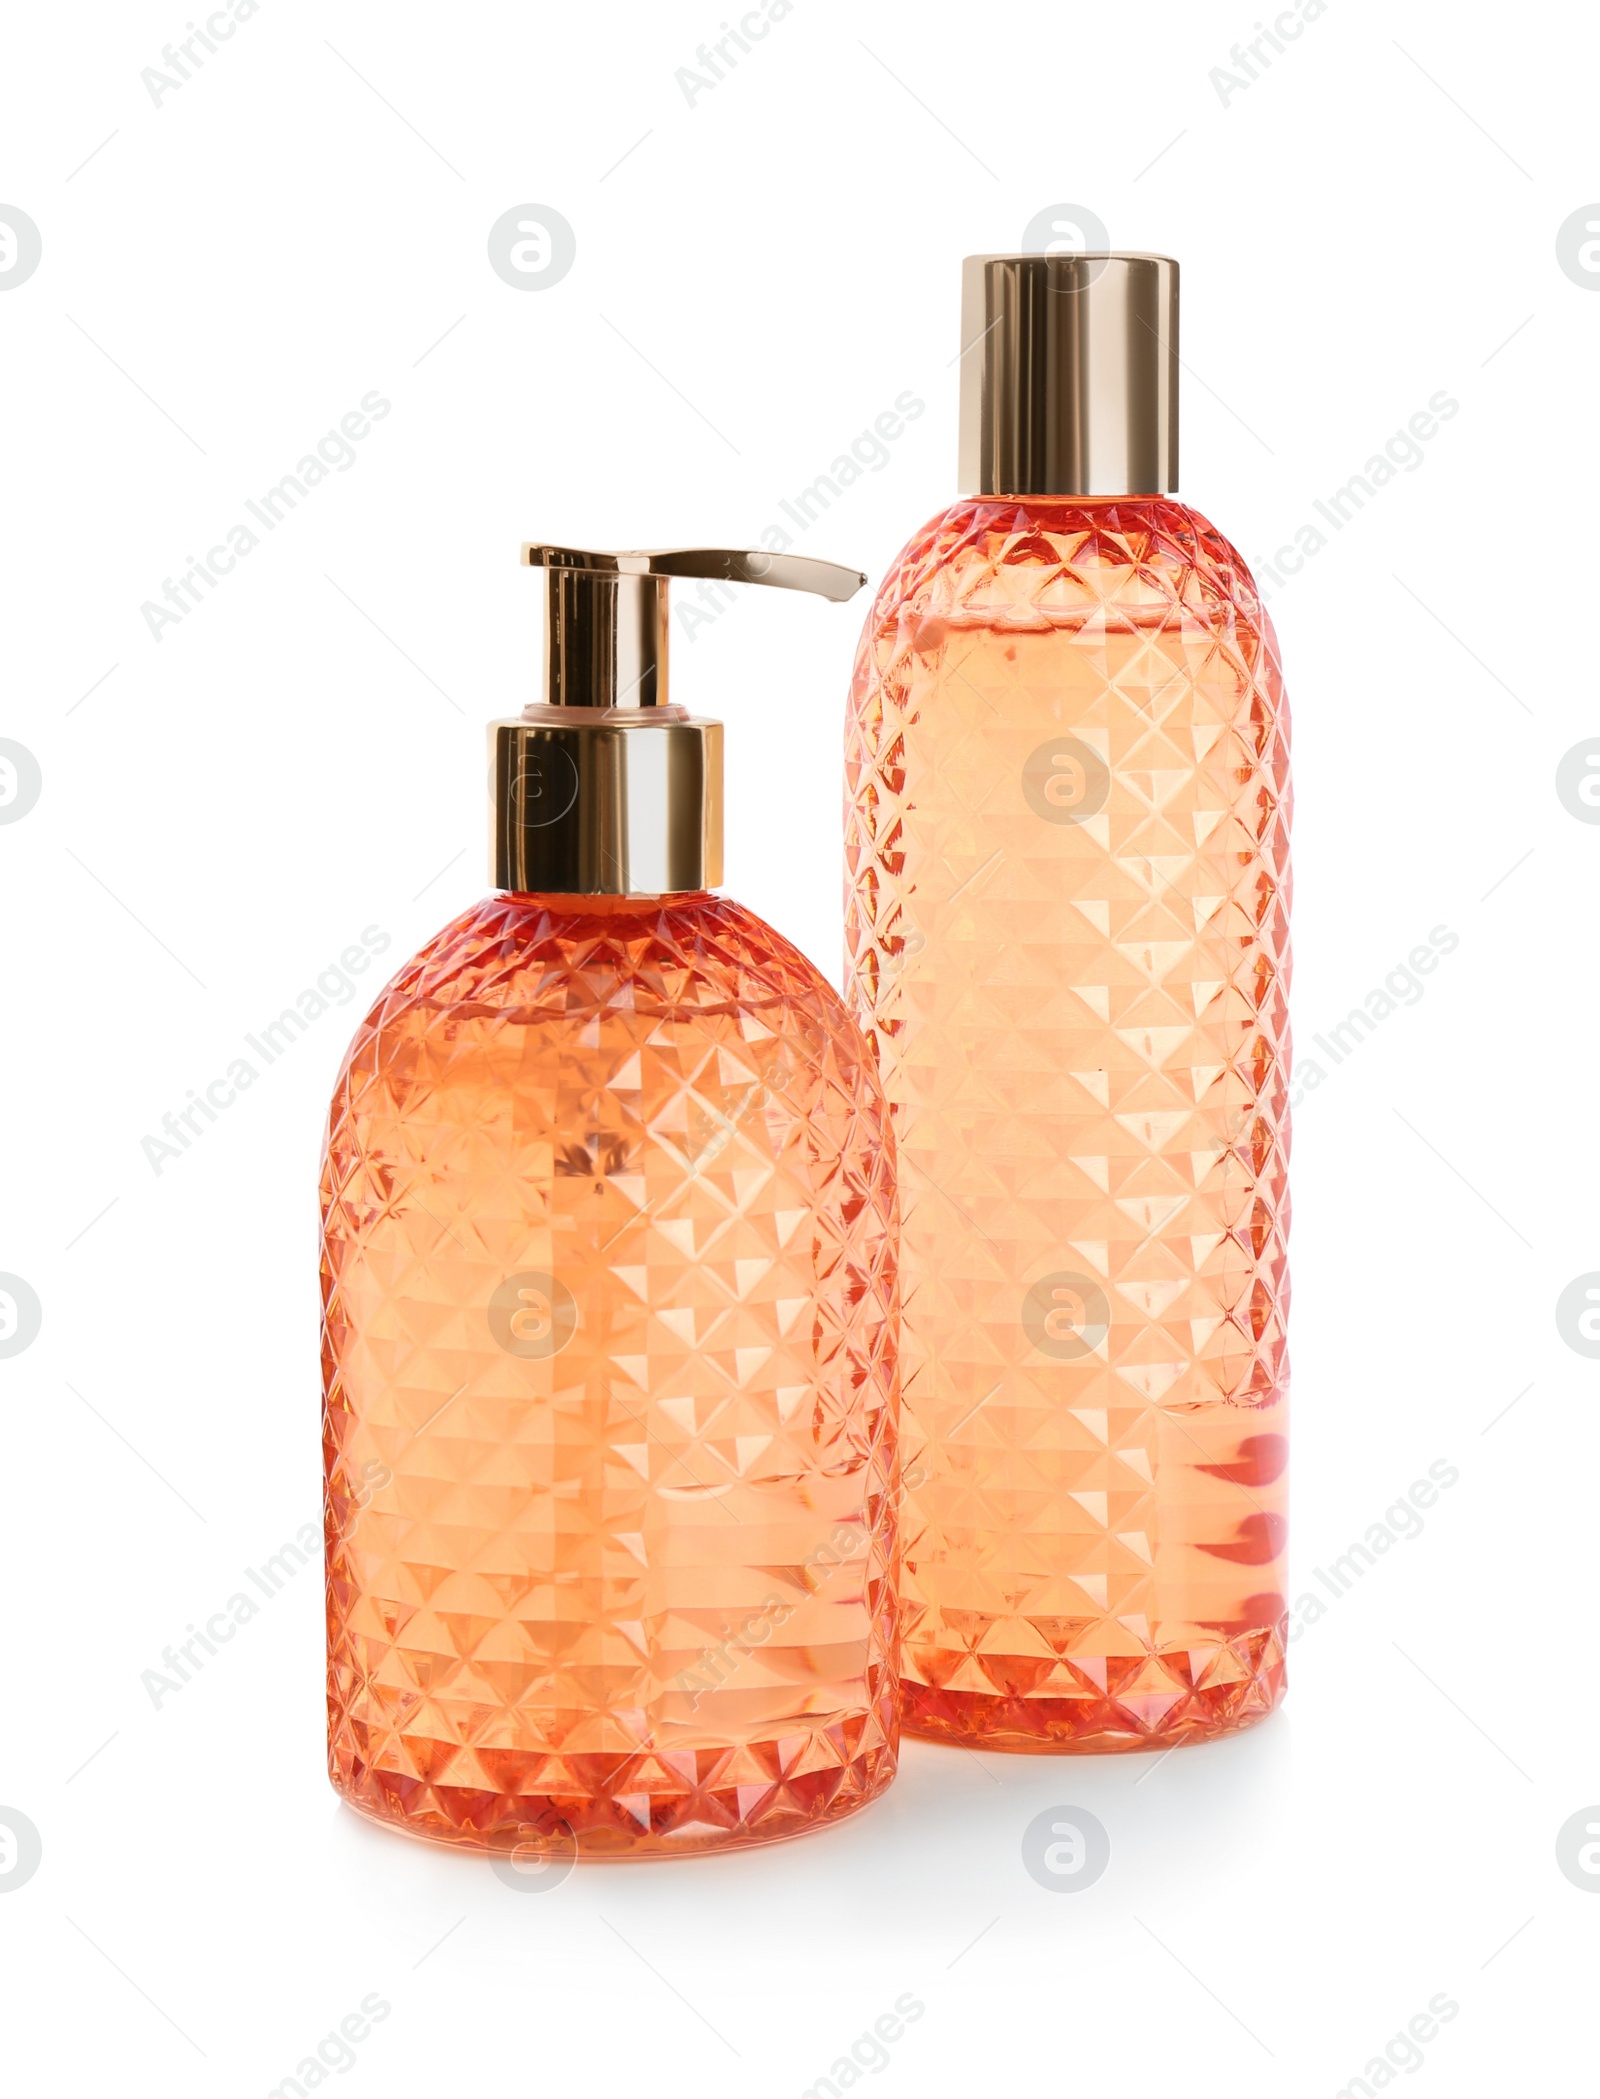 Photo of Stylish containers with skin care products on white background